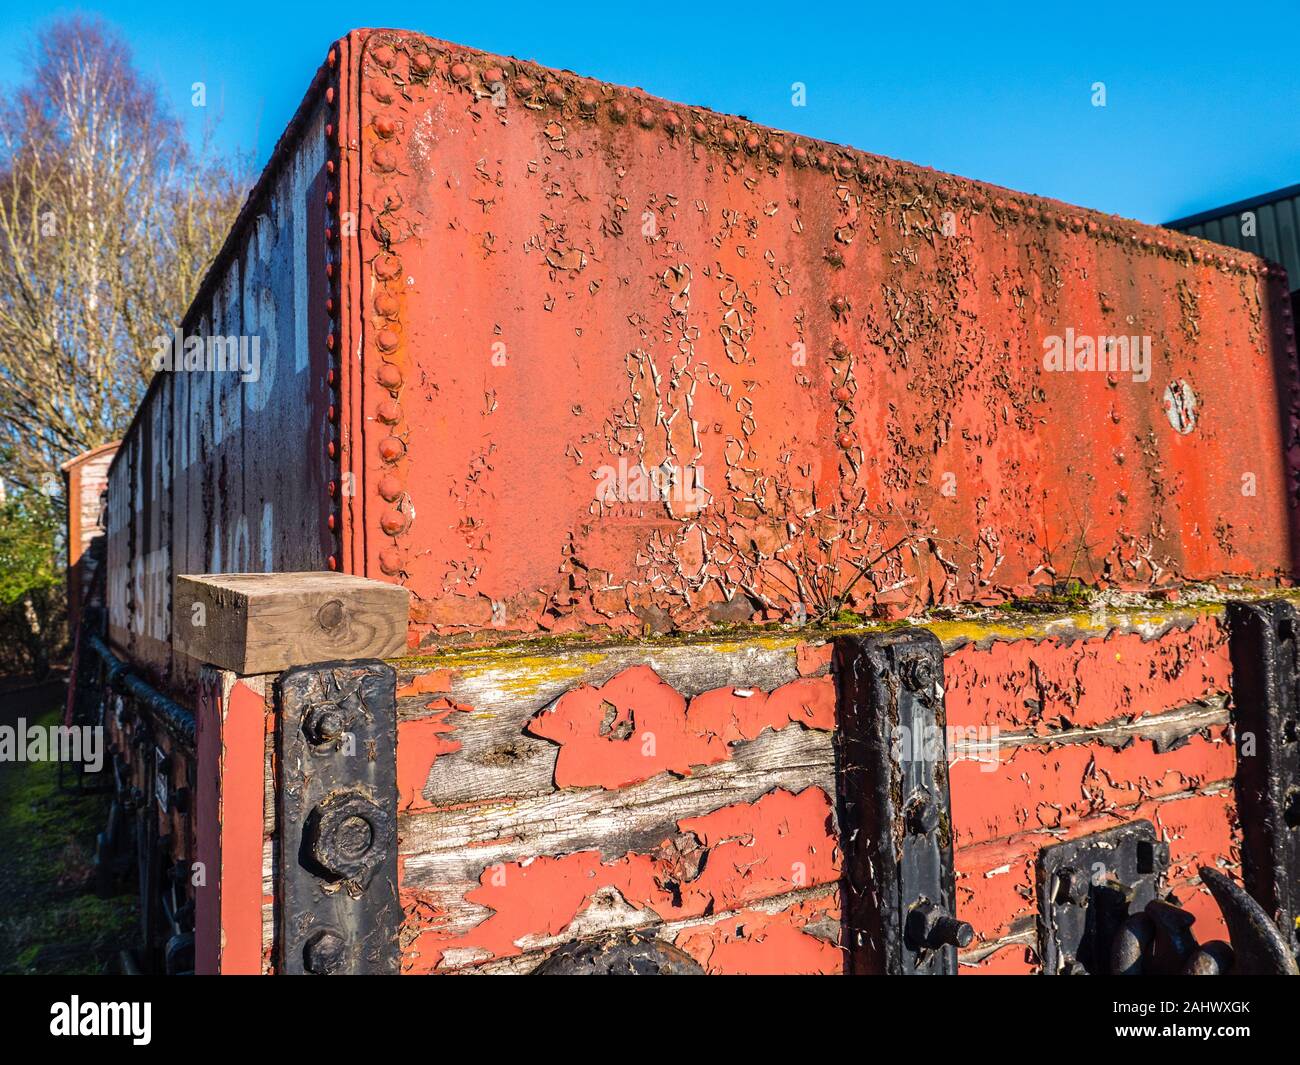 Red Railway Wagon, Hiver, Didcot Railway Center, Oxfordshire, Angleterre, Royaume-Uni, Gb. Banque D'Images